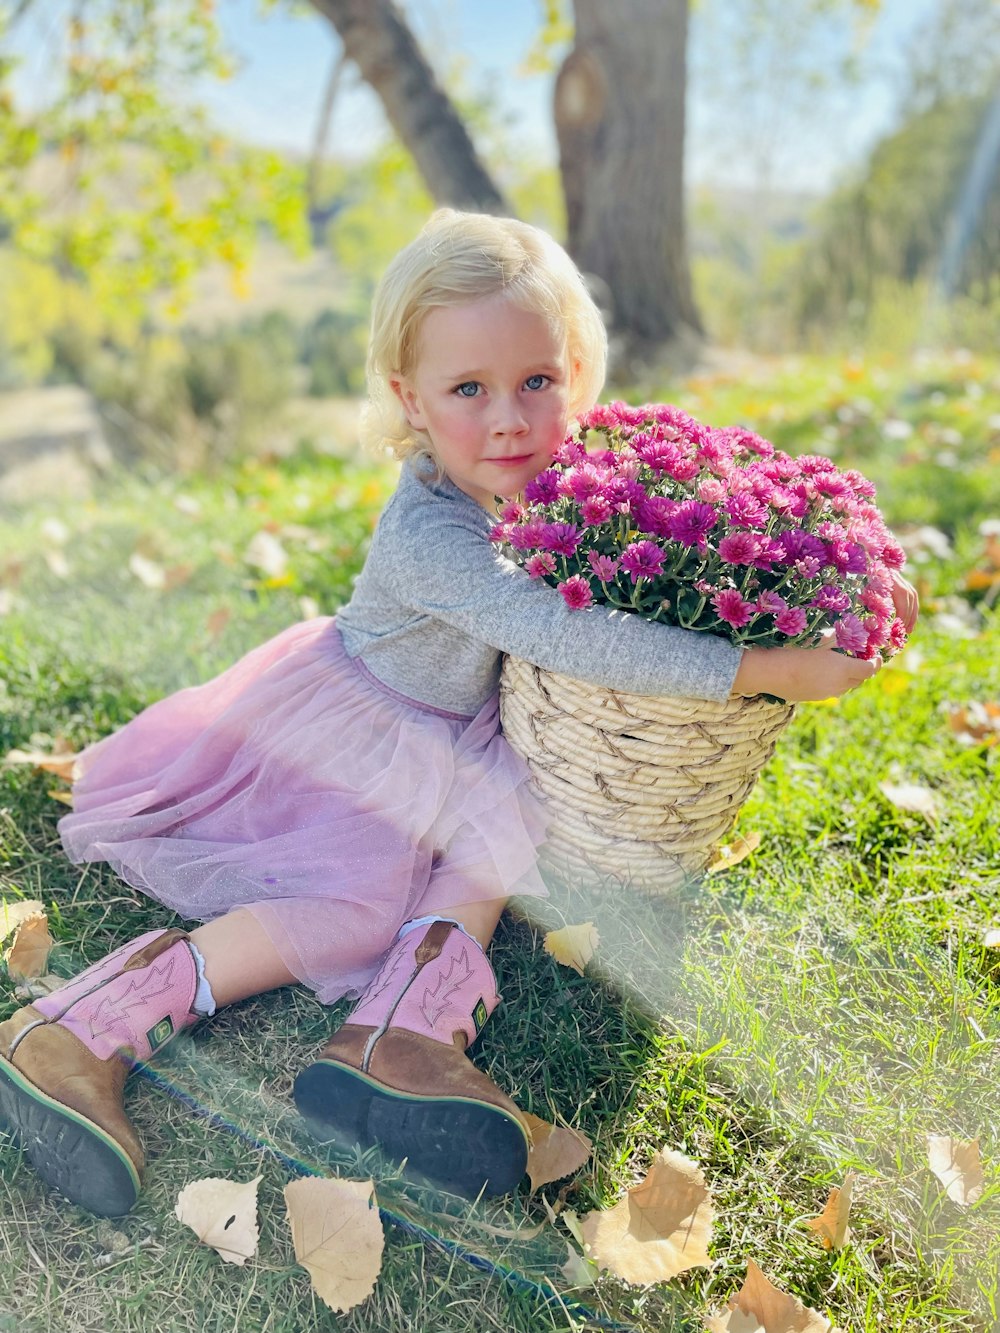 a girl sitting in grass holding flowers